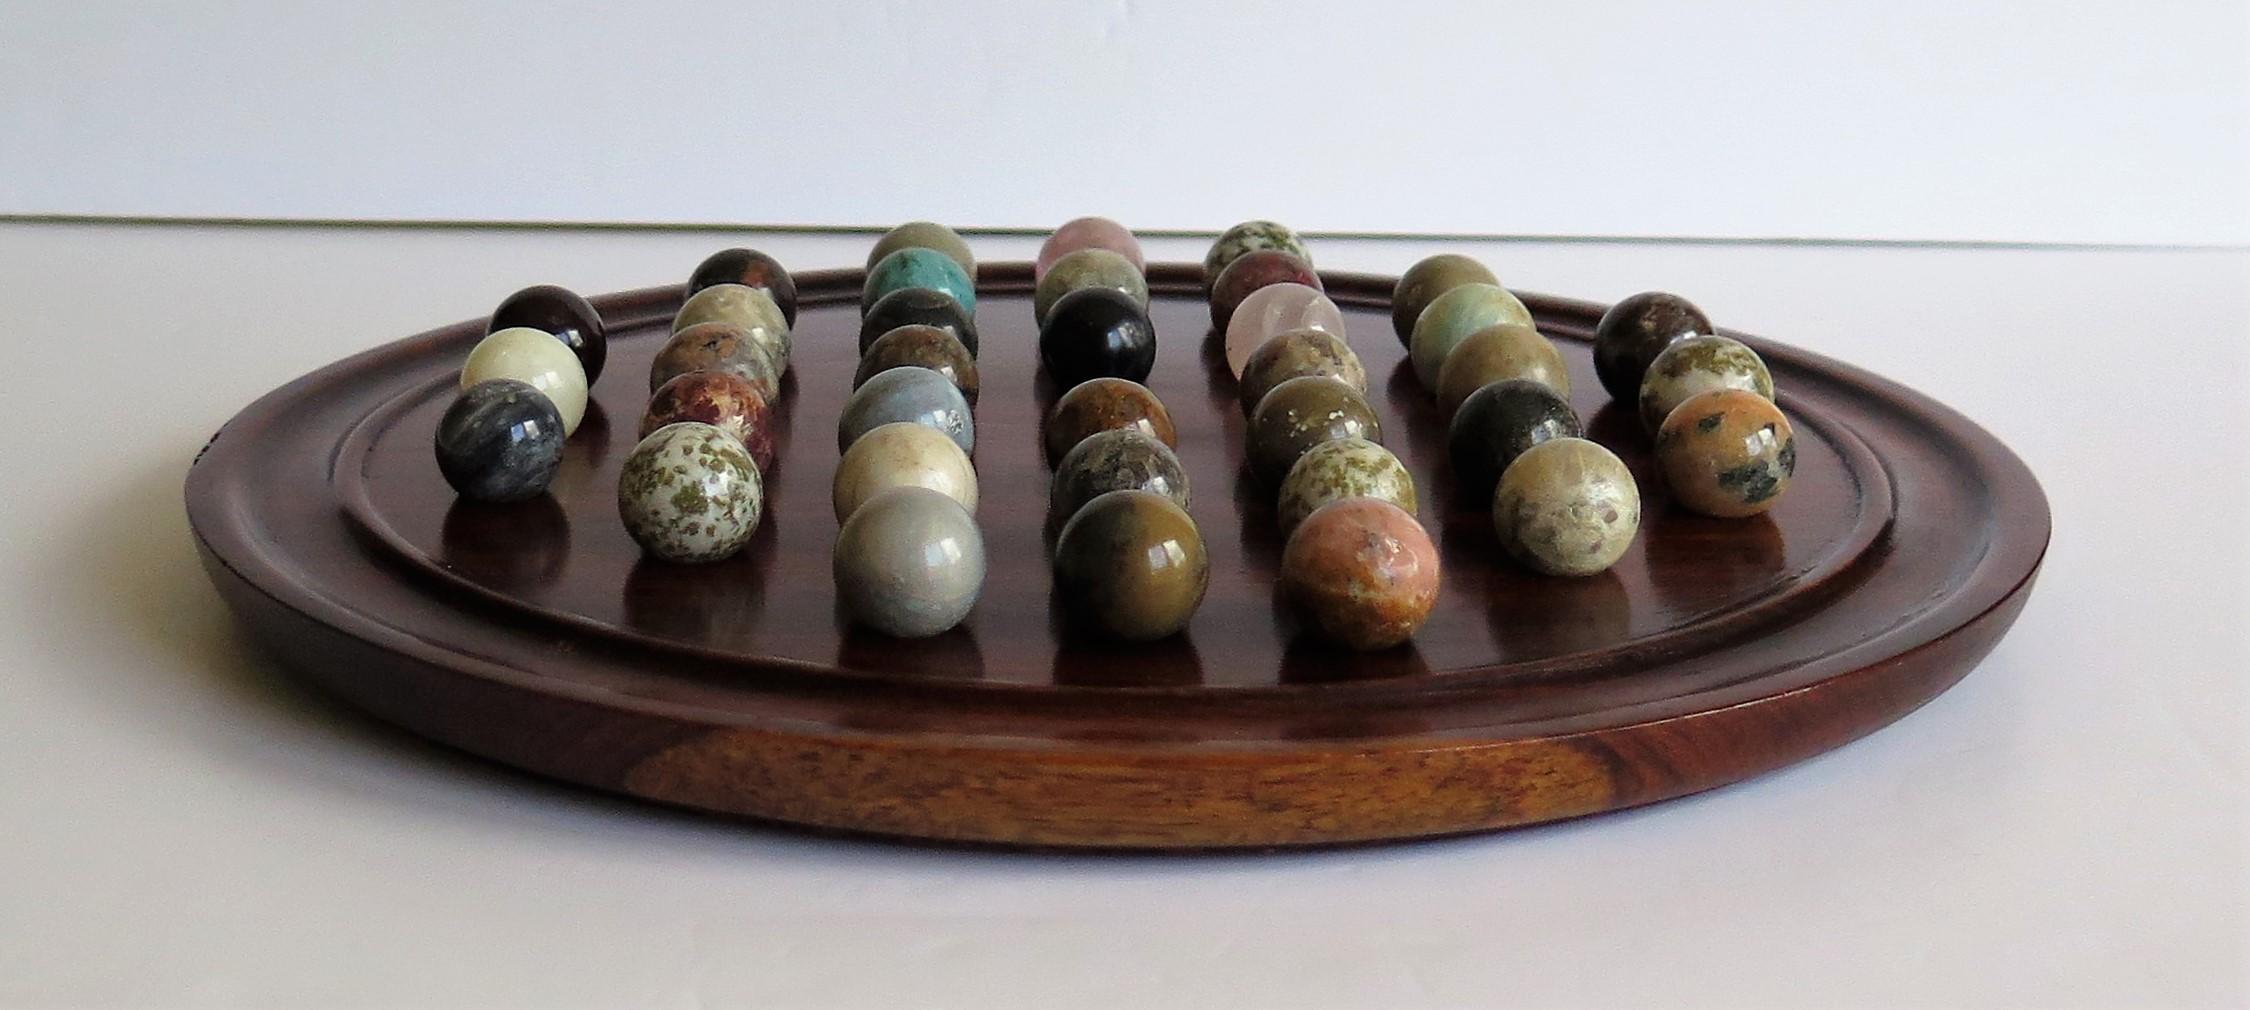 English Marble Solitaire Game Polished Hardwood Board 36 Agate Stone Marbles, circa 1915